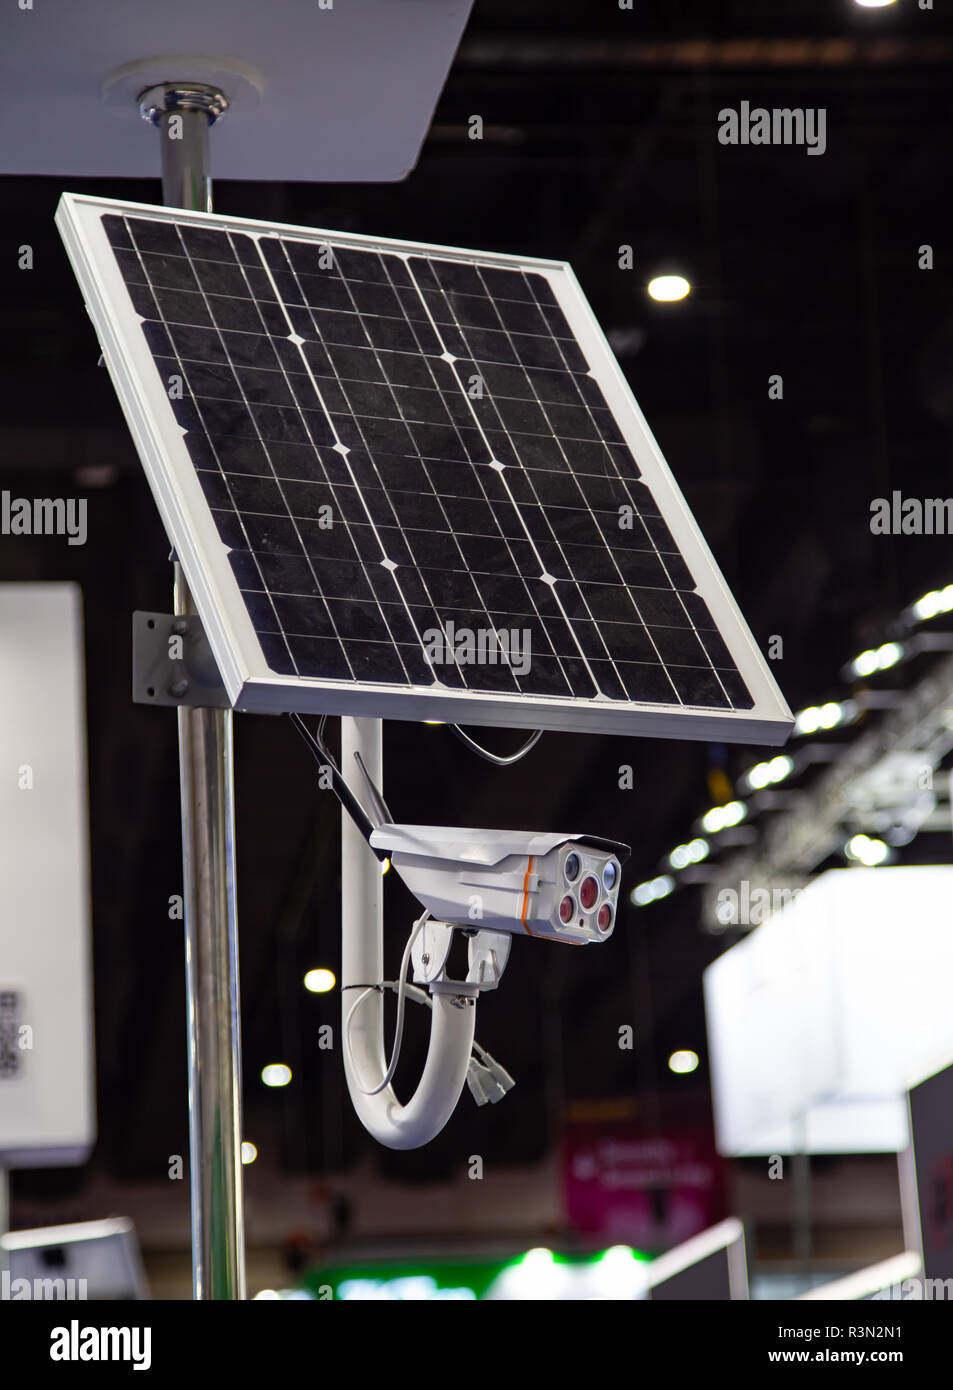 CCTV IP camera with solar cell mounted on pole Stock Photo